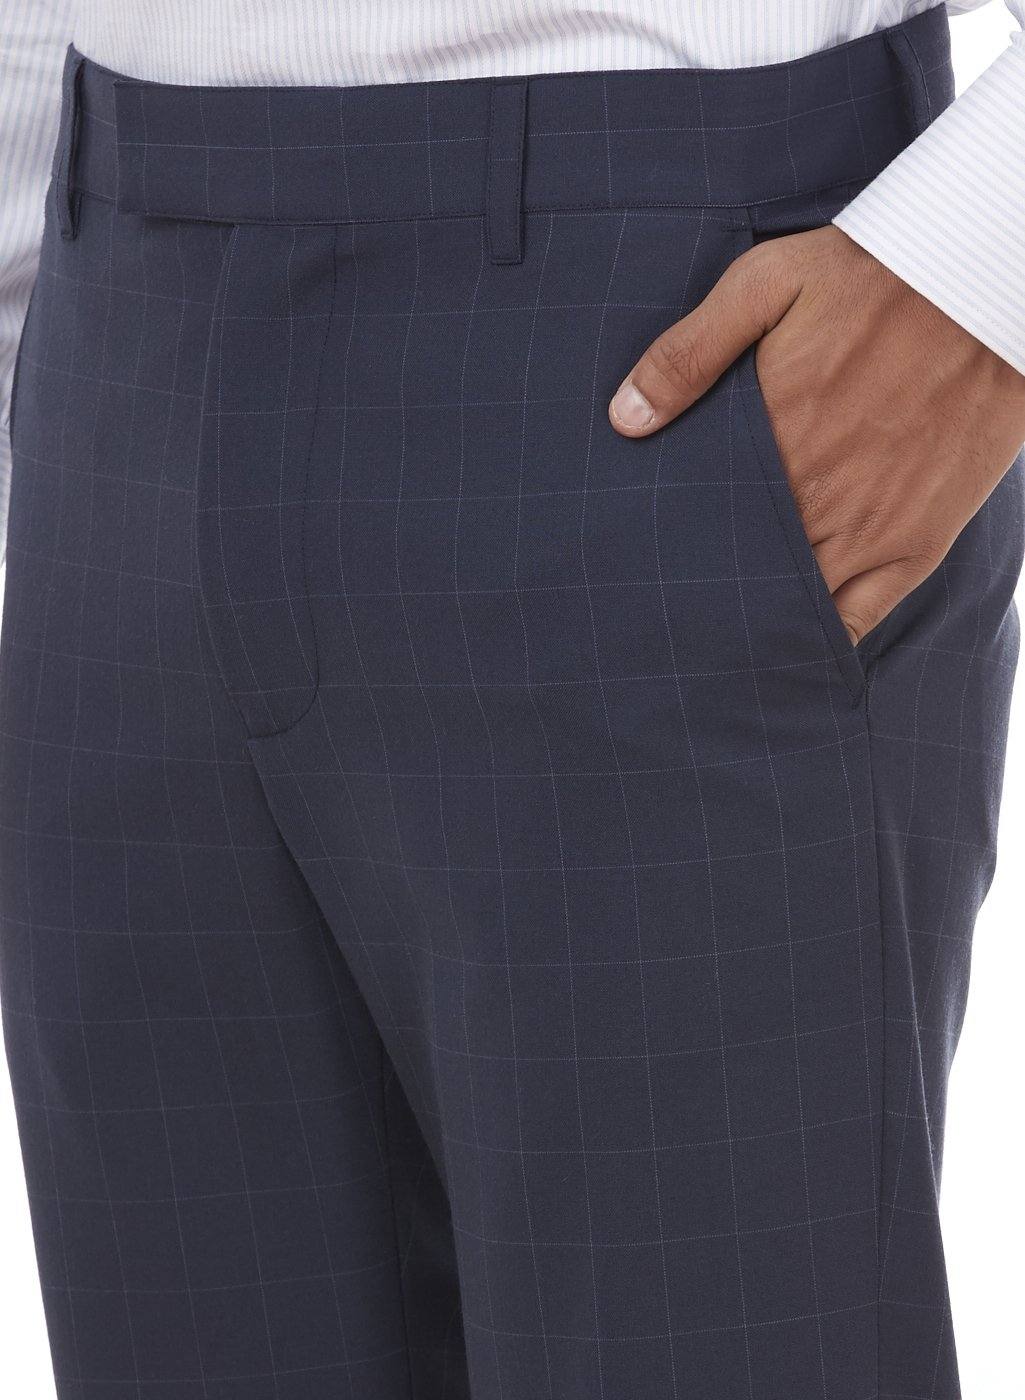 OLIVER CHECK TROUSER - Genes online store 2020